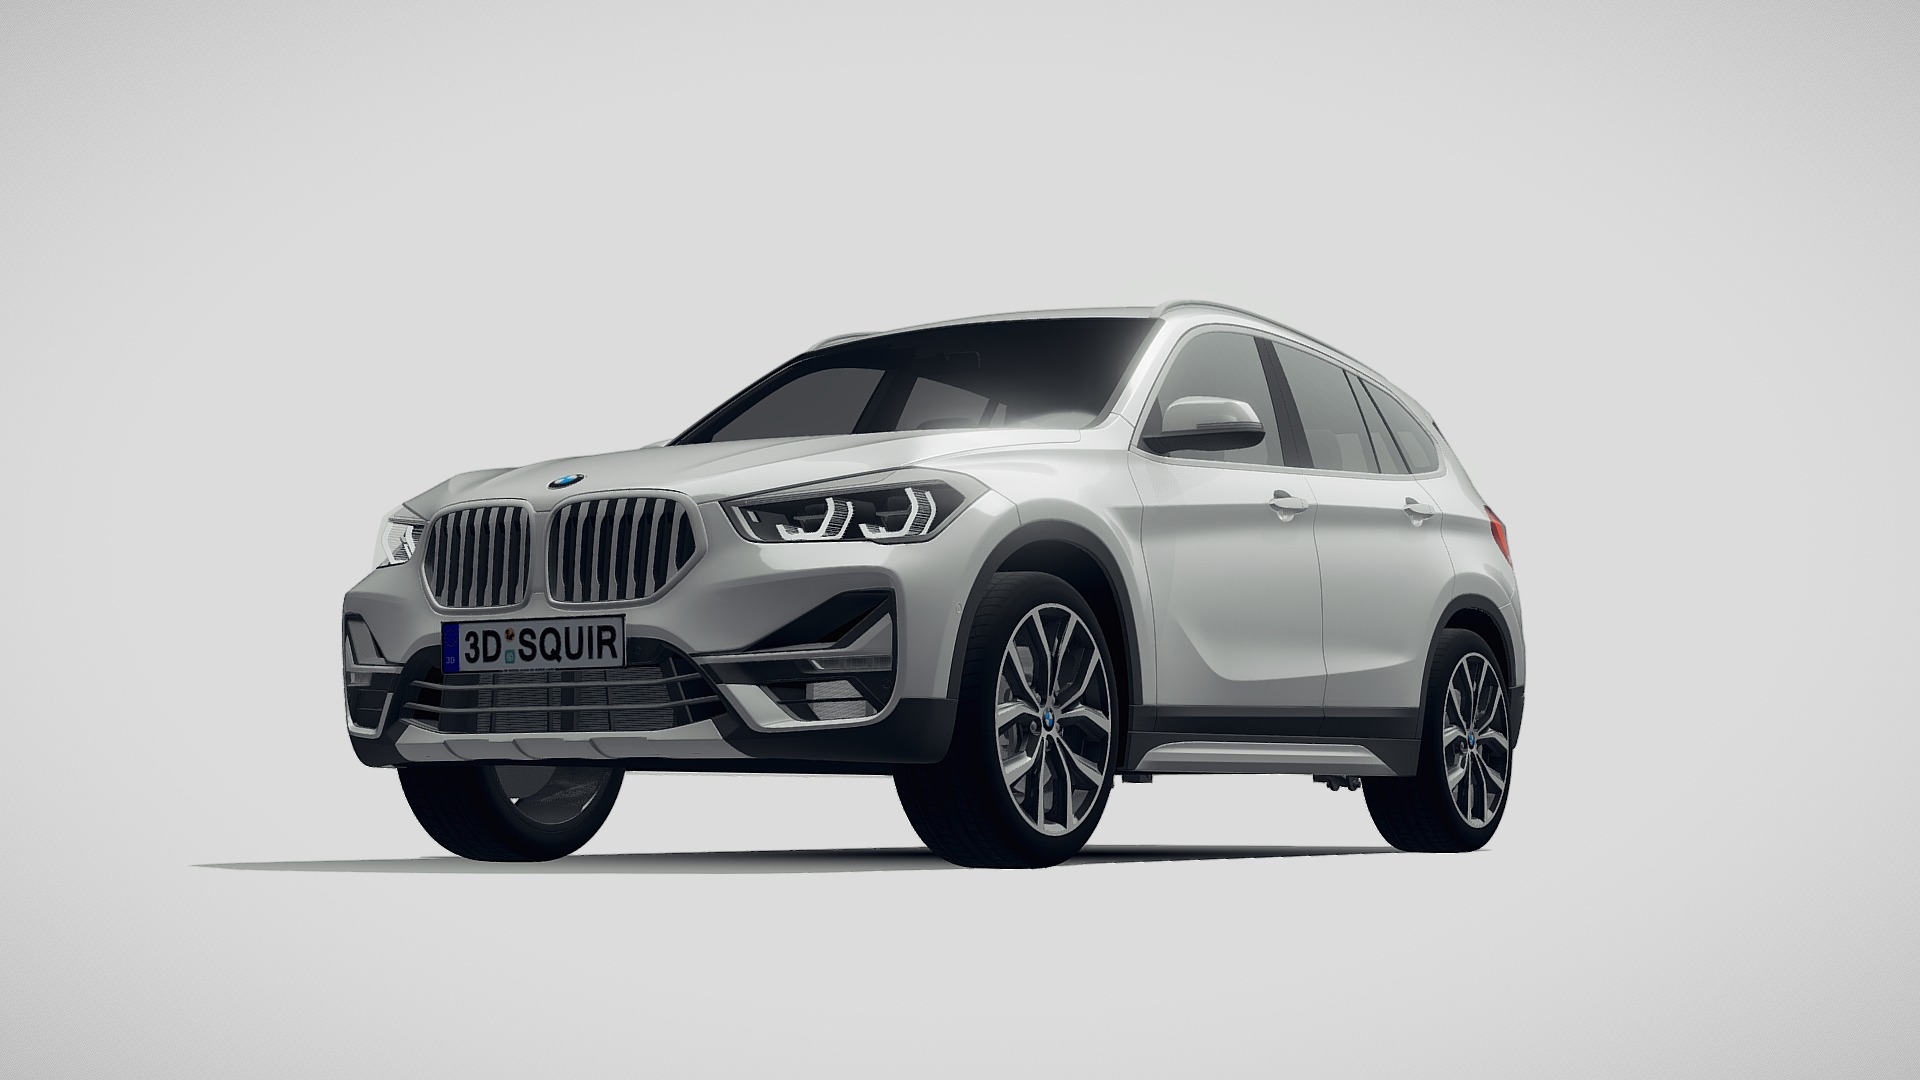 3D model BMW X1 2020 - This is a 3D model of the BMW X1 2020. The 3D model is about a silver car with a black background.